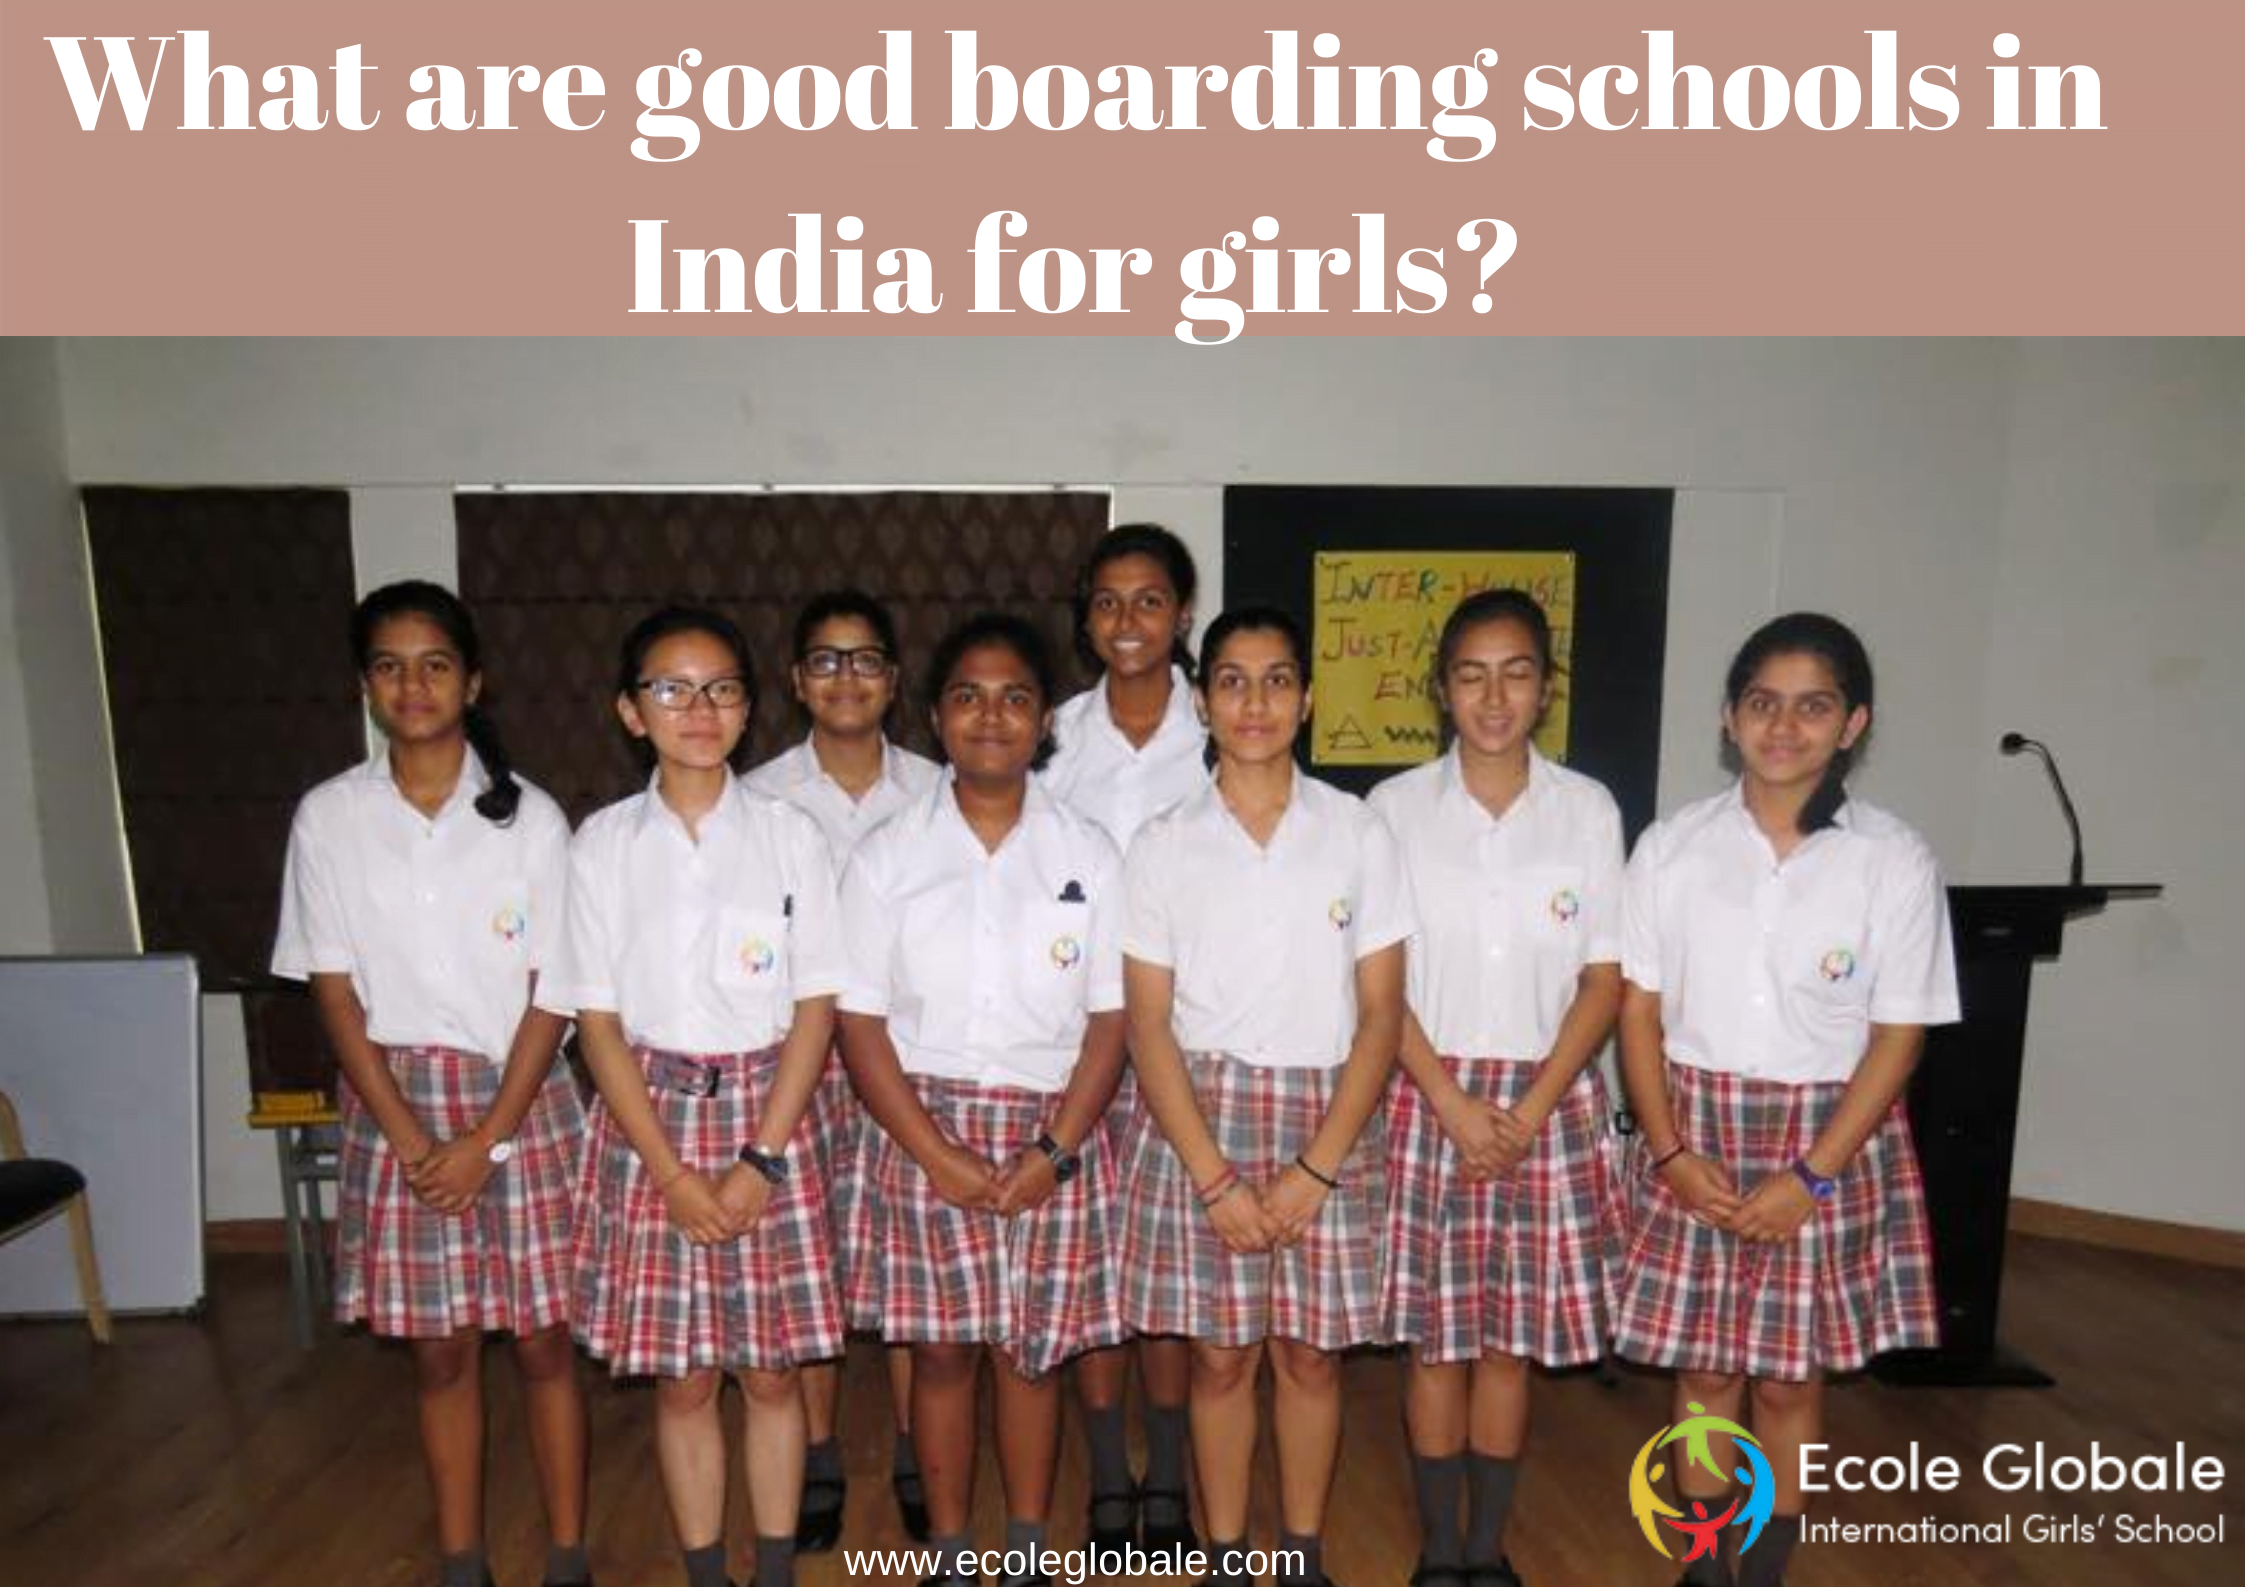 What are good boarding schools in India for girls?